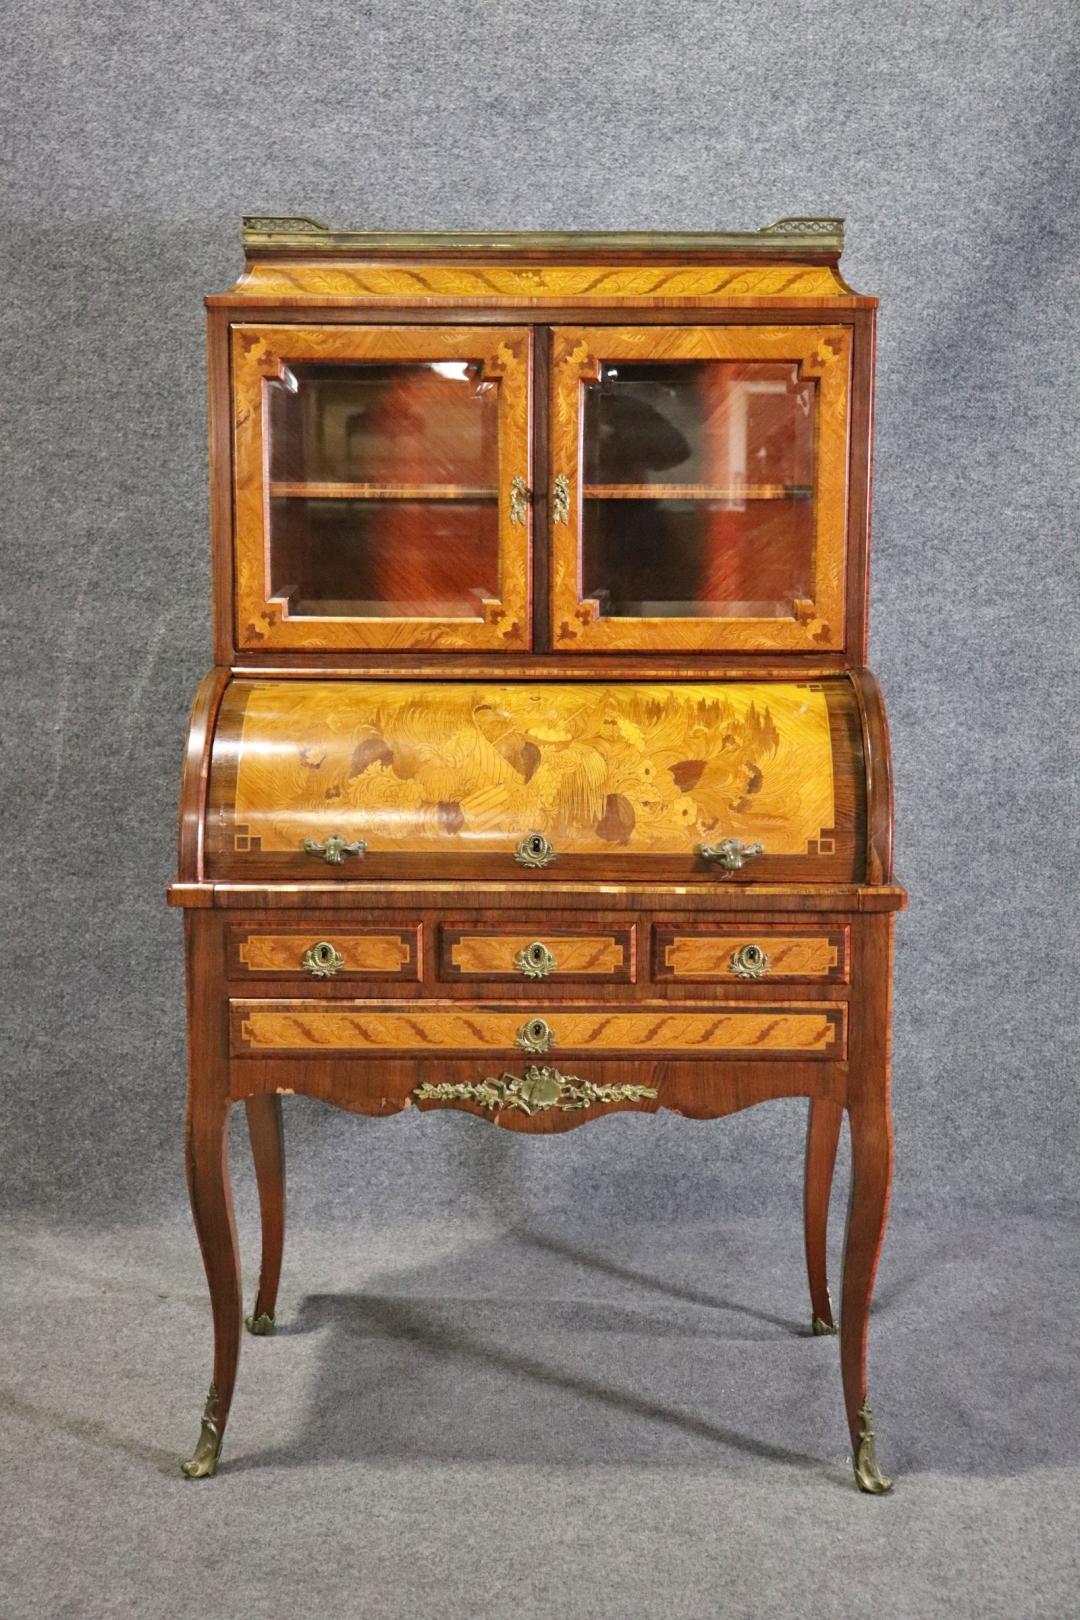 From Slatoff Estate. Rosewood with exotic veneer. Vitrine top with marble top. Rouge marble gallery. Beveled glass doors. Brass accents and foot caps. 58